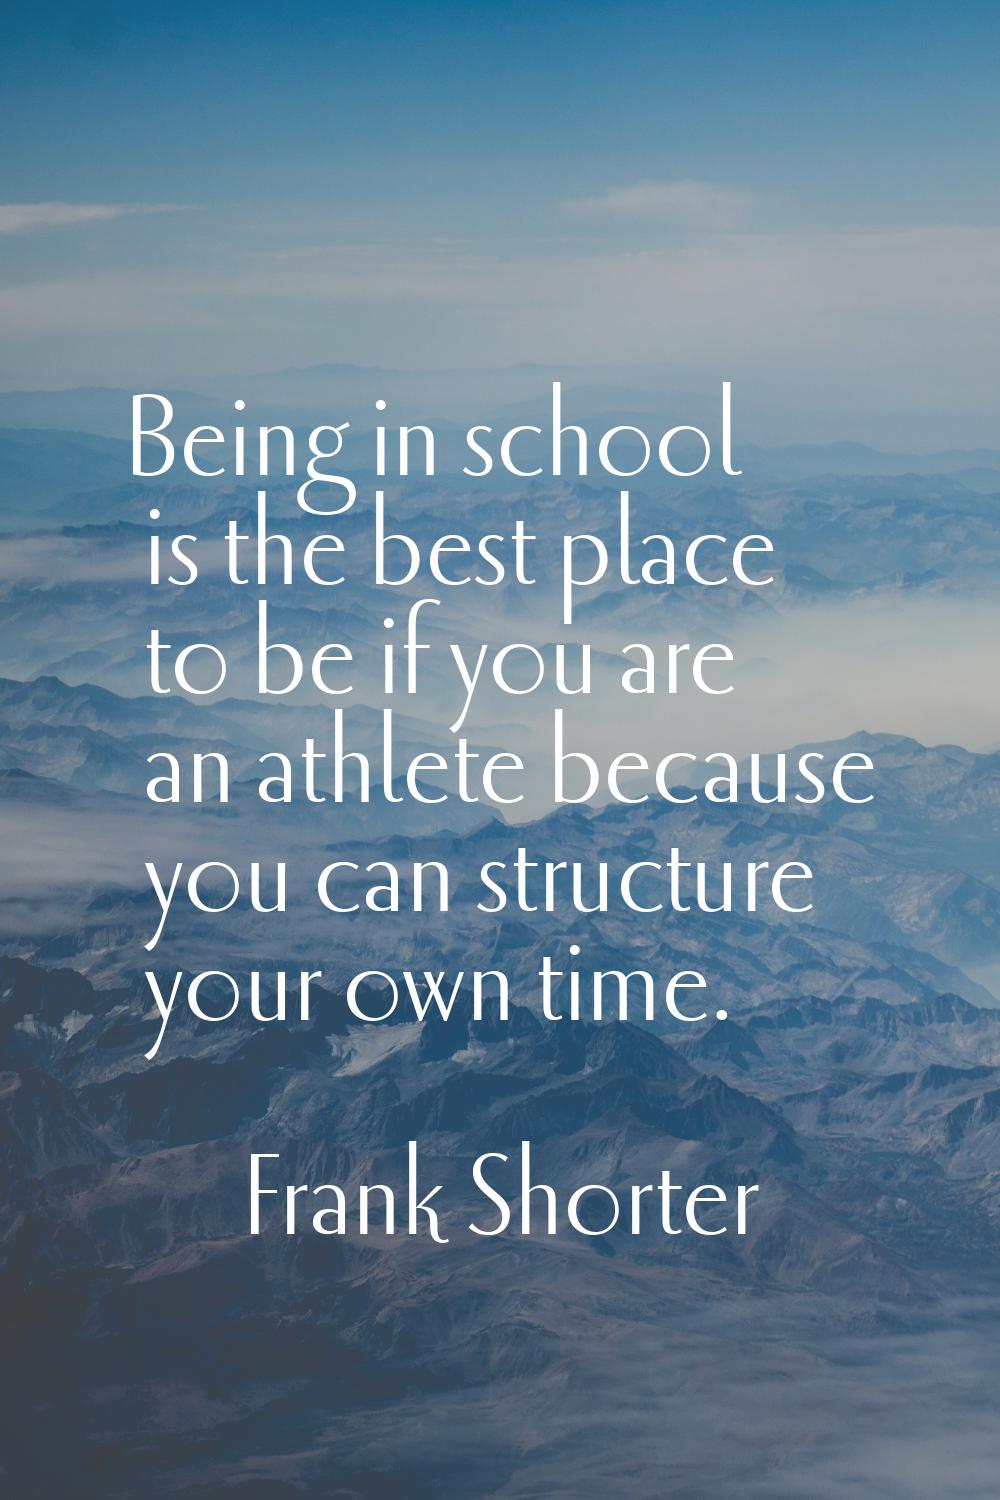 Being in school is the best place to be if you are an athlete because you can structure your own ti